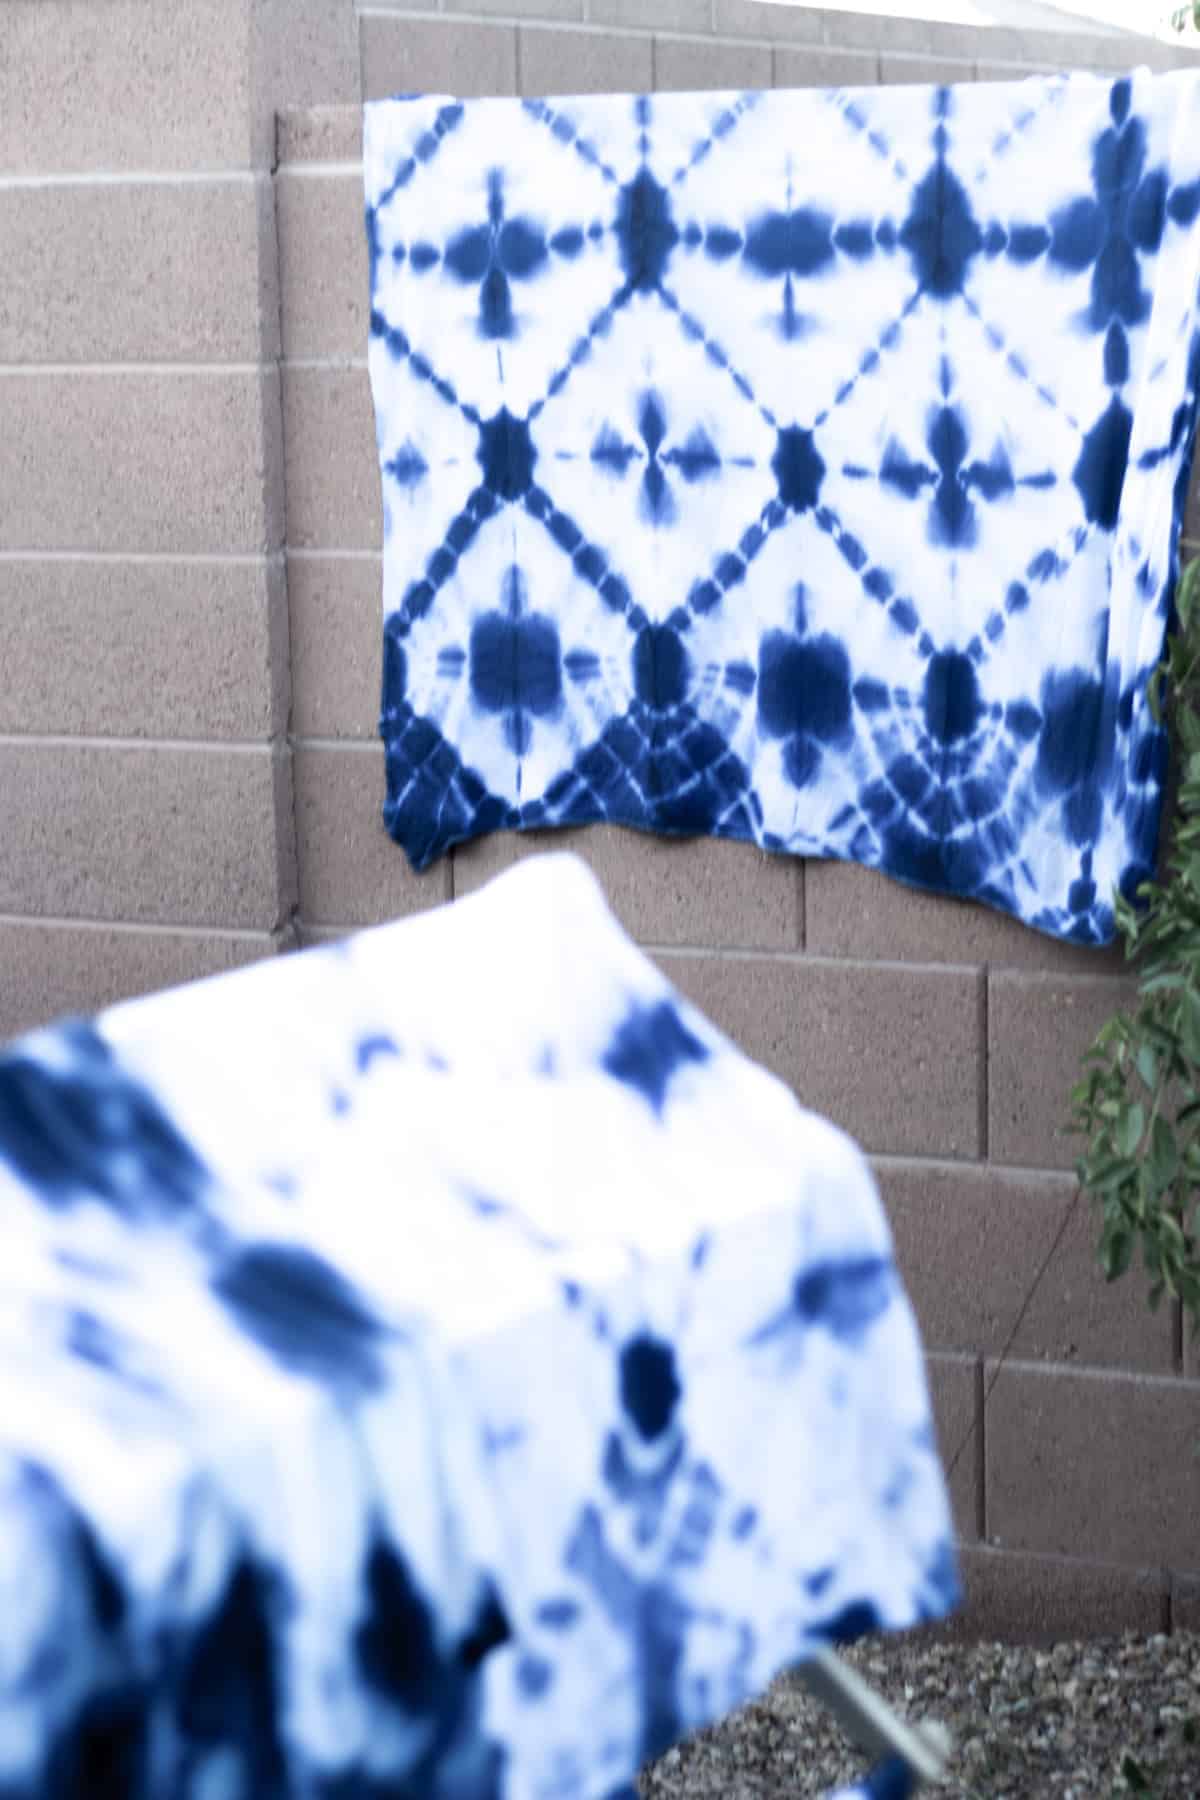 Indigo dye is an ancient art of dyeing that you can do at home. Although it is relatively simple, there are a few pitfalls to avoid that I help you navigate here!